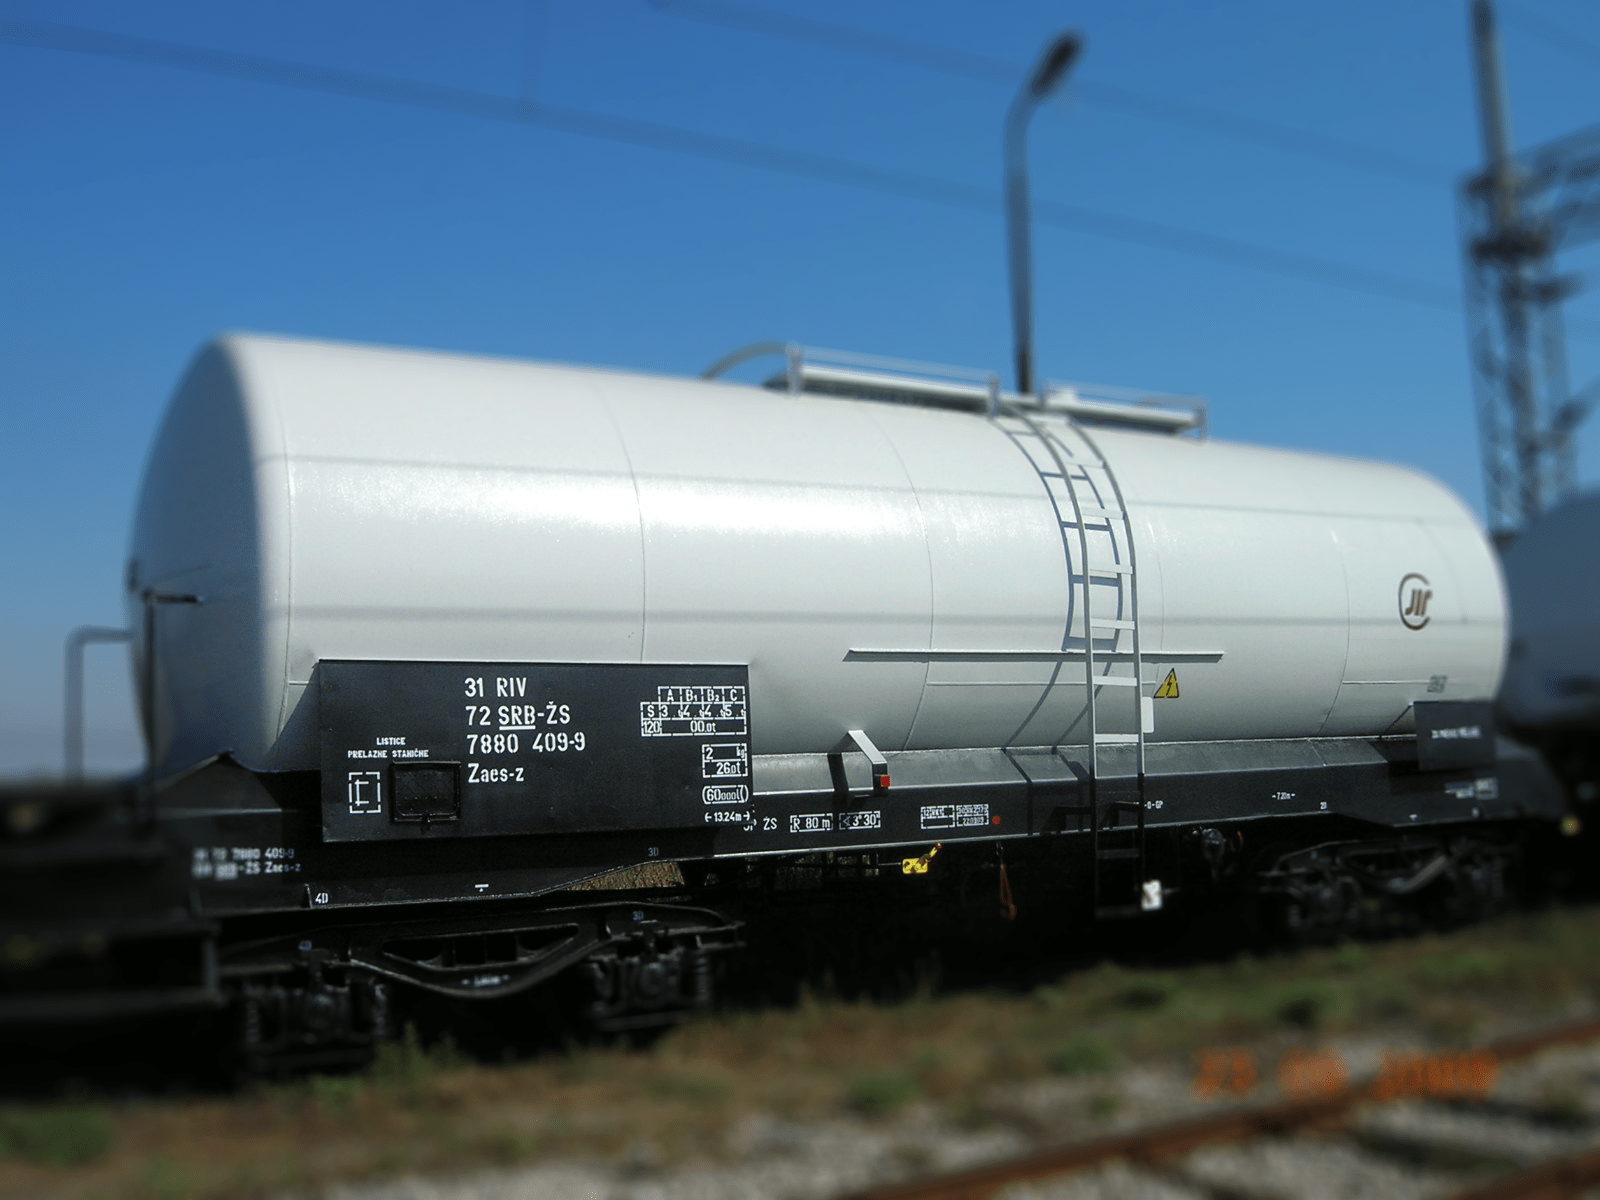 Tank wagon with steel vessels for holding liquids or gases